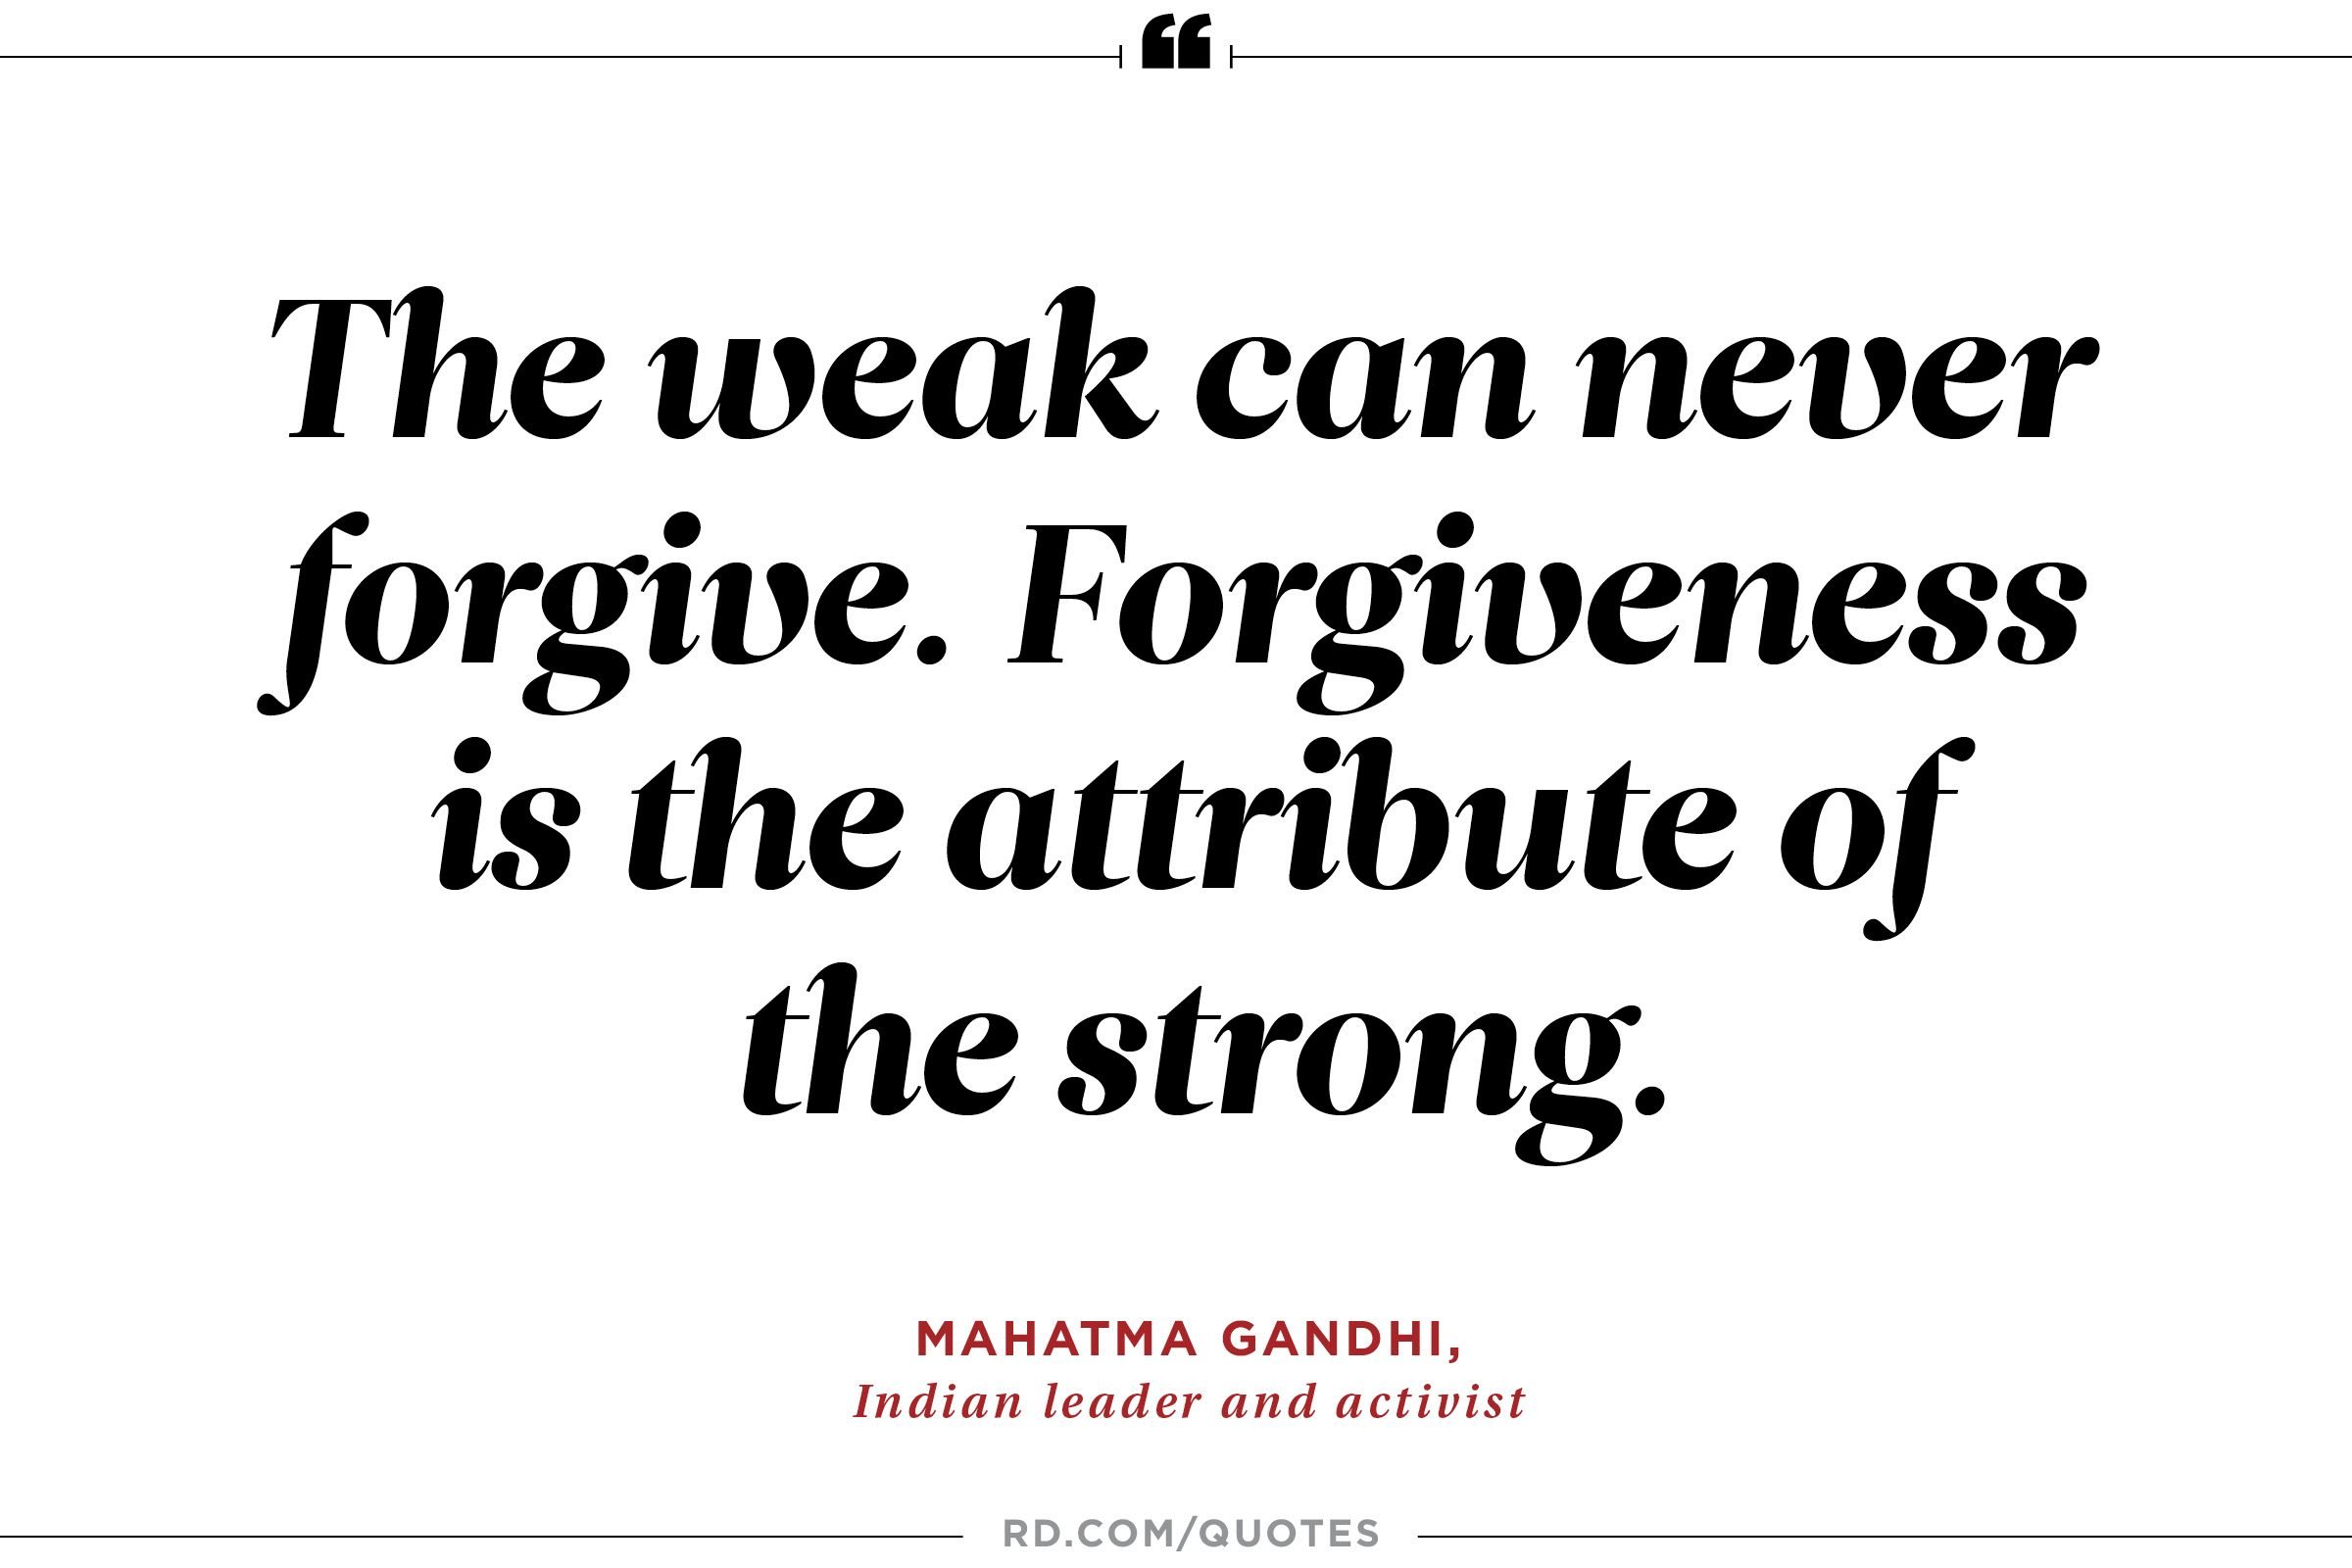 Forgiveness Quotes That Will Help You Finally Let Go | Reader's Digest